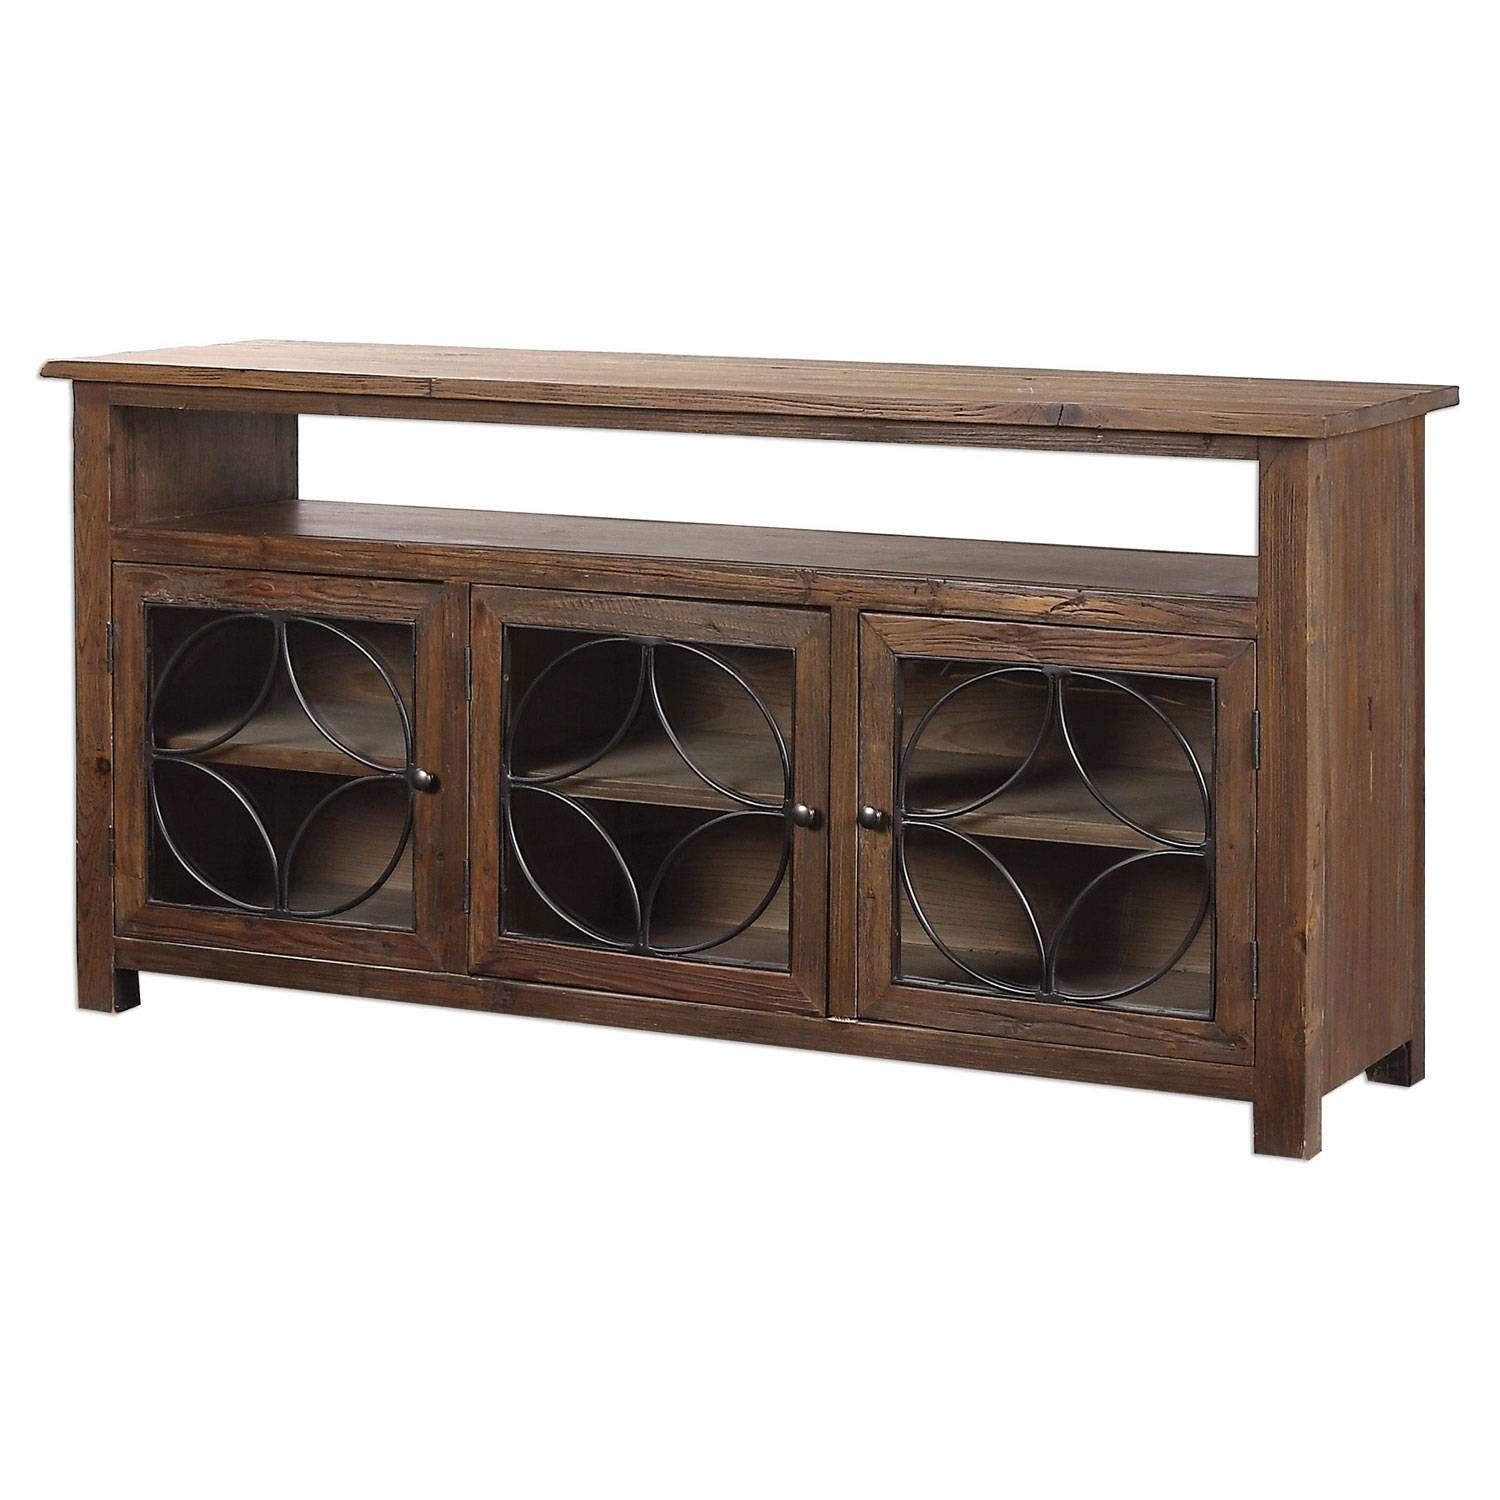 Buffets & Sideboards On Sale | Bellacor Pertaining To Most Up To Date 36 Inch Sideboards (View 11 of 15)